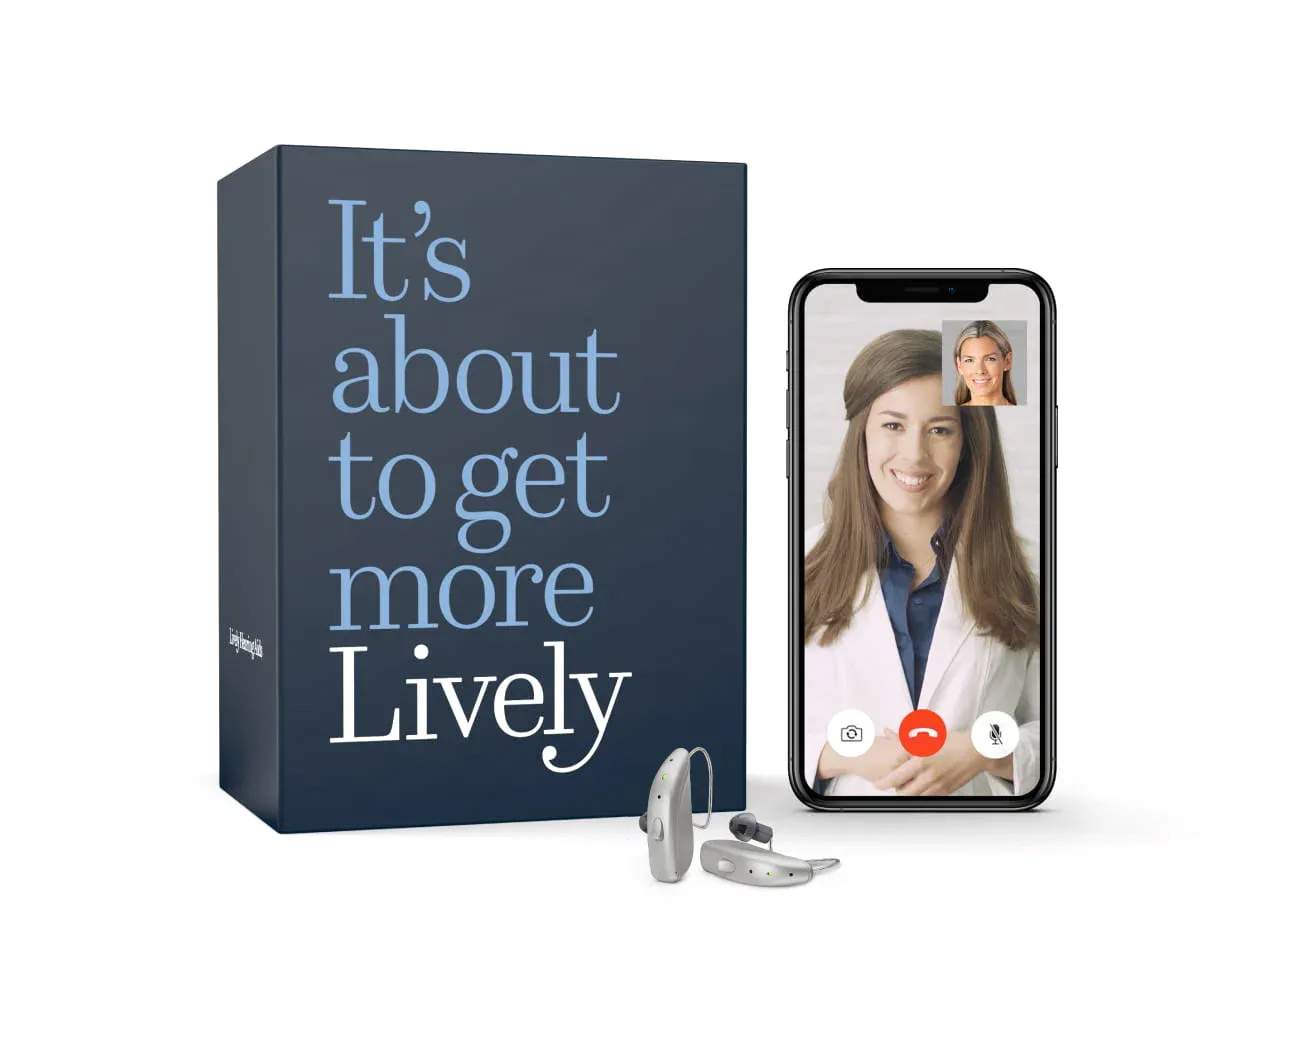 Box with message "It's about to get more Lively", a pair of hearing aids, and an iphone with a doctor video messaging a woman 